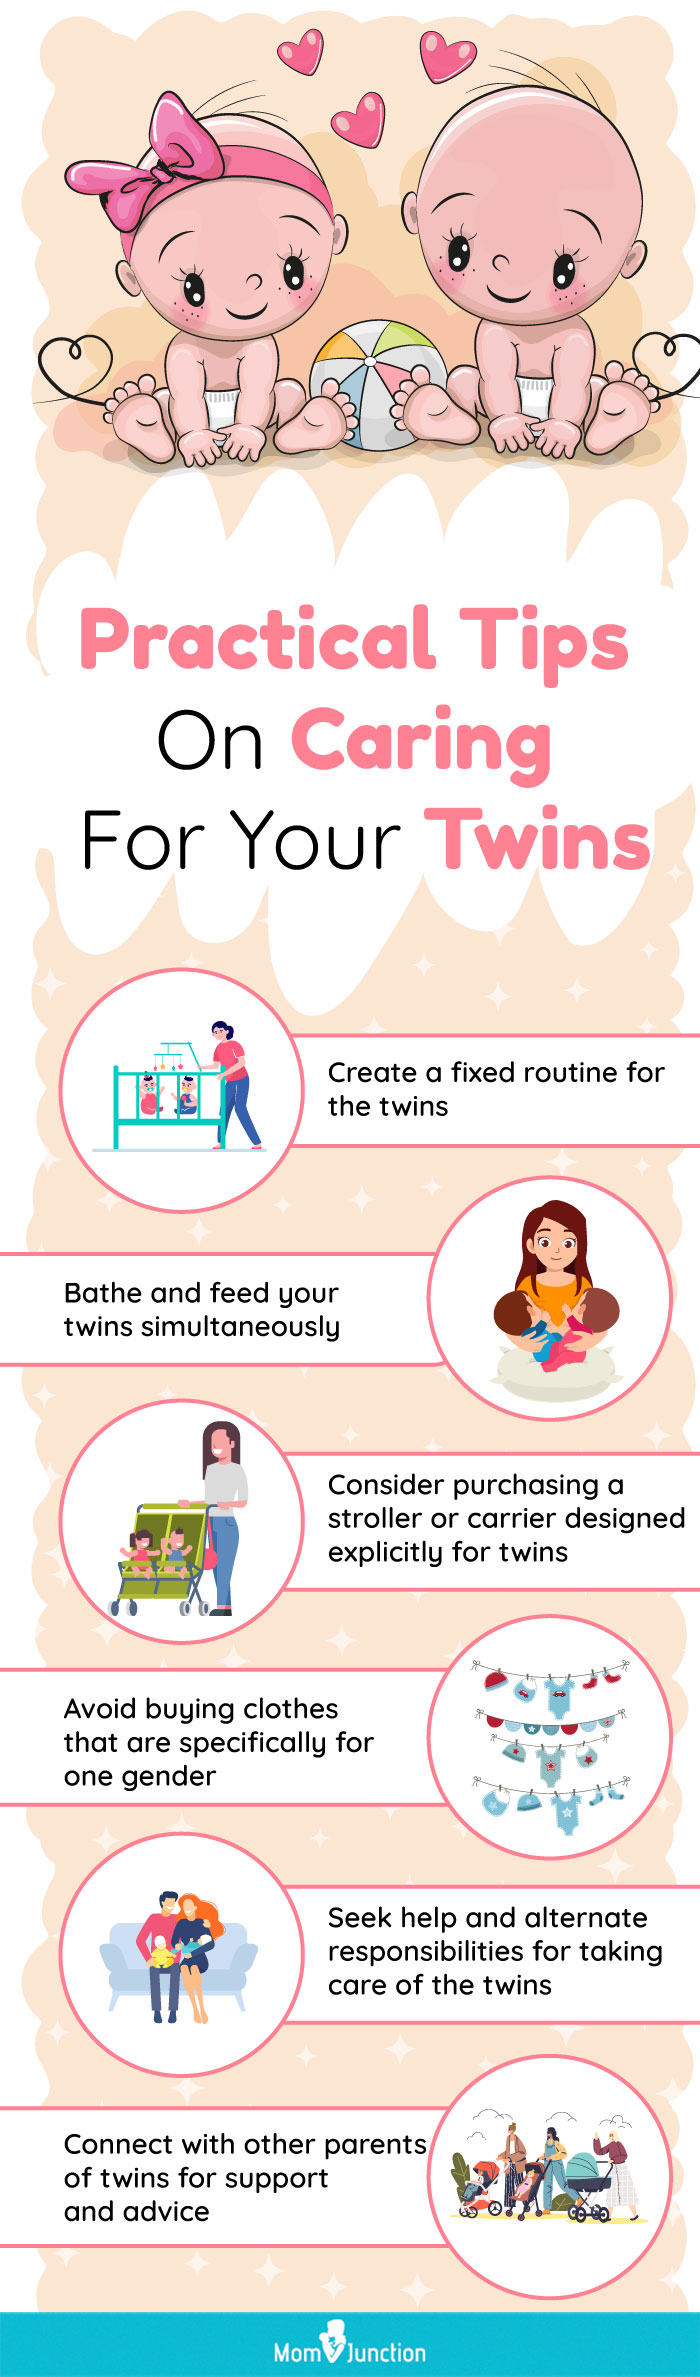 practical tips on caring for your twins [infographic]